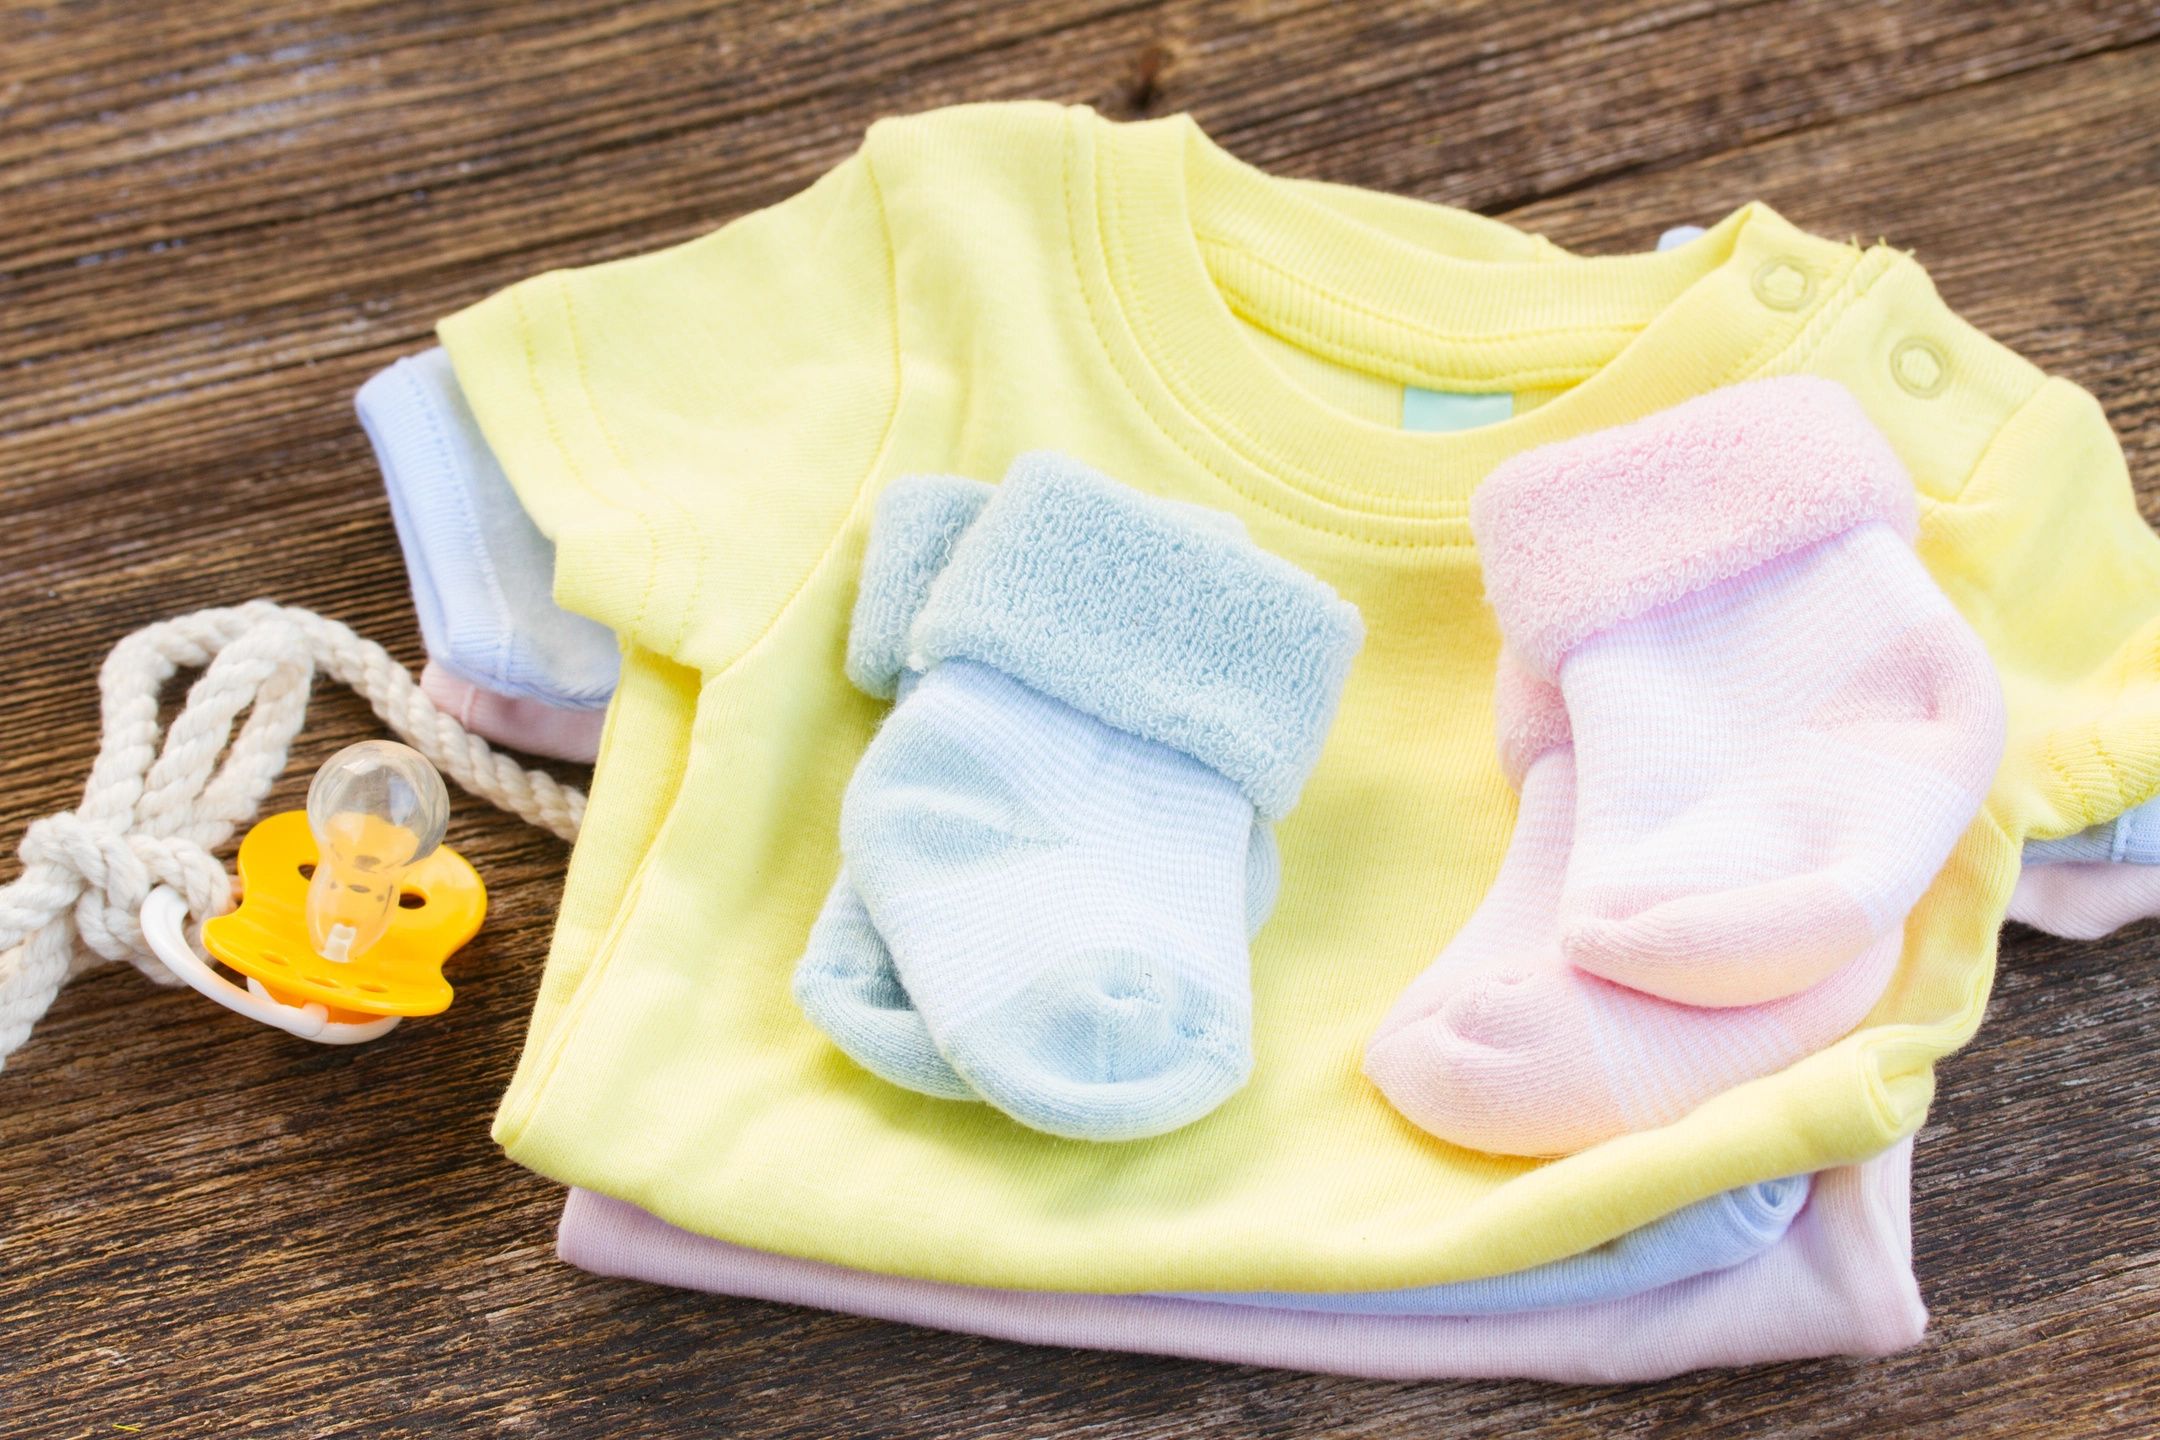 baby clothes sitting on a table. A yellow shirt, a pacifier, a blue pair of socks and a pink pair of socks.